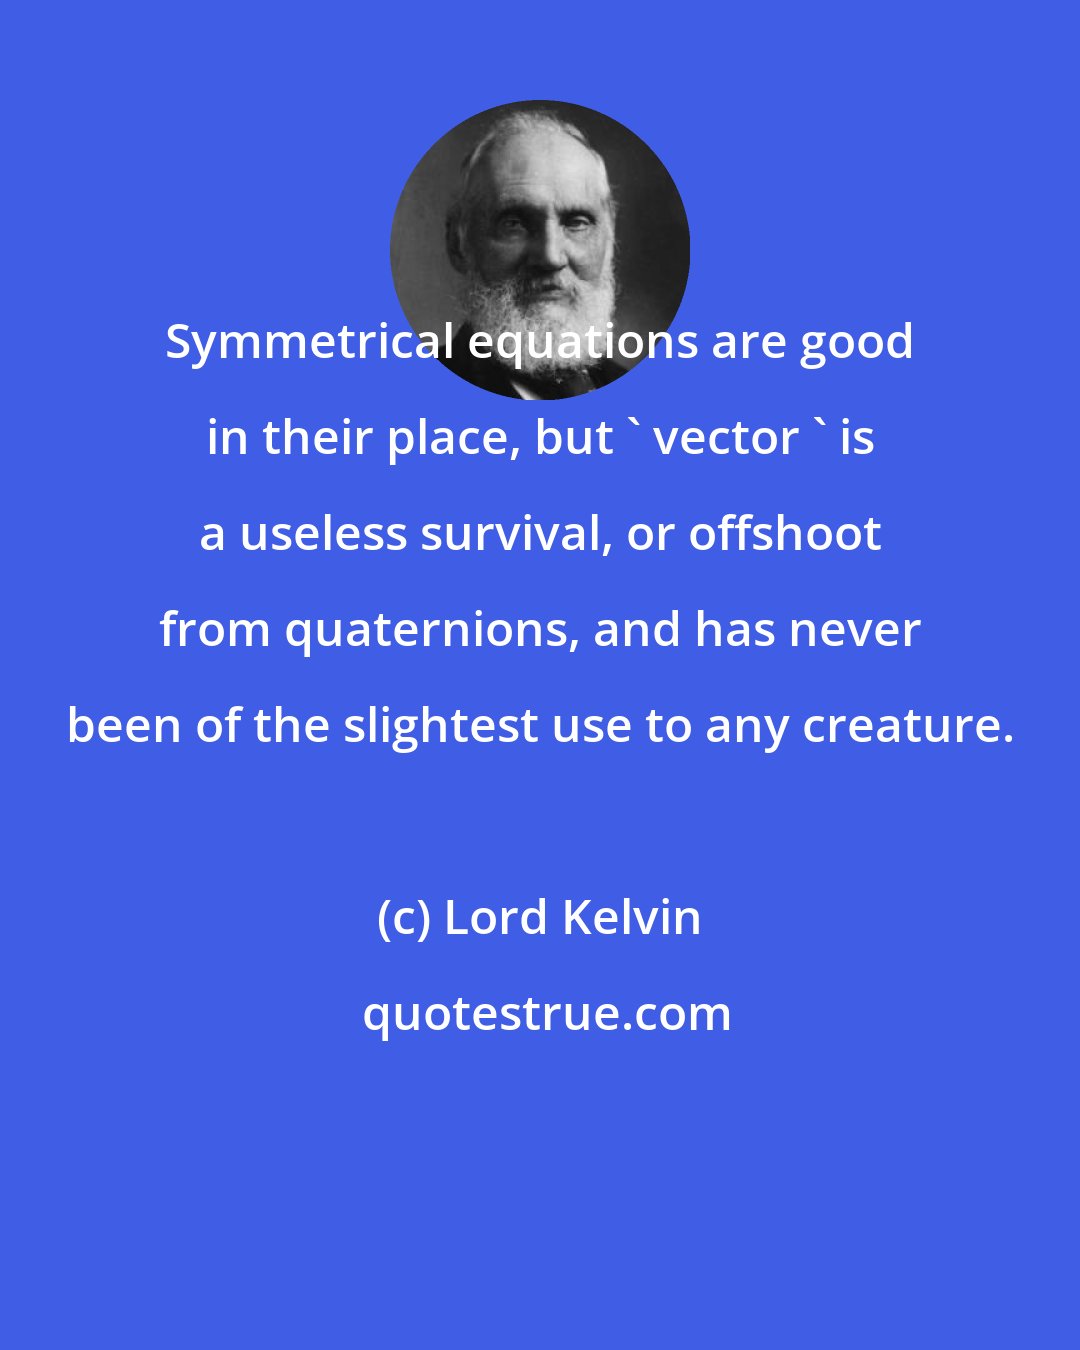 Lord Kelvin: Symmetrical equations are good in their place, but ' vector ' is a useless survival, or offshoot from quaternions, and has never been of the slightest use to any creature.